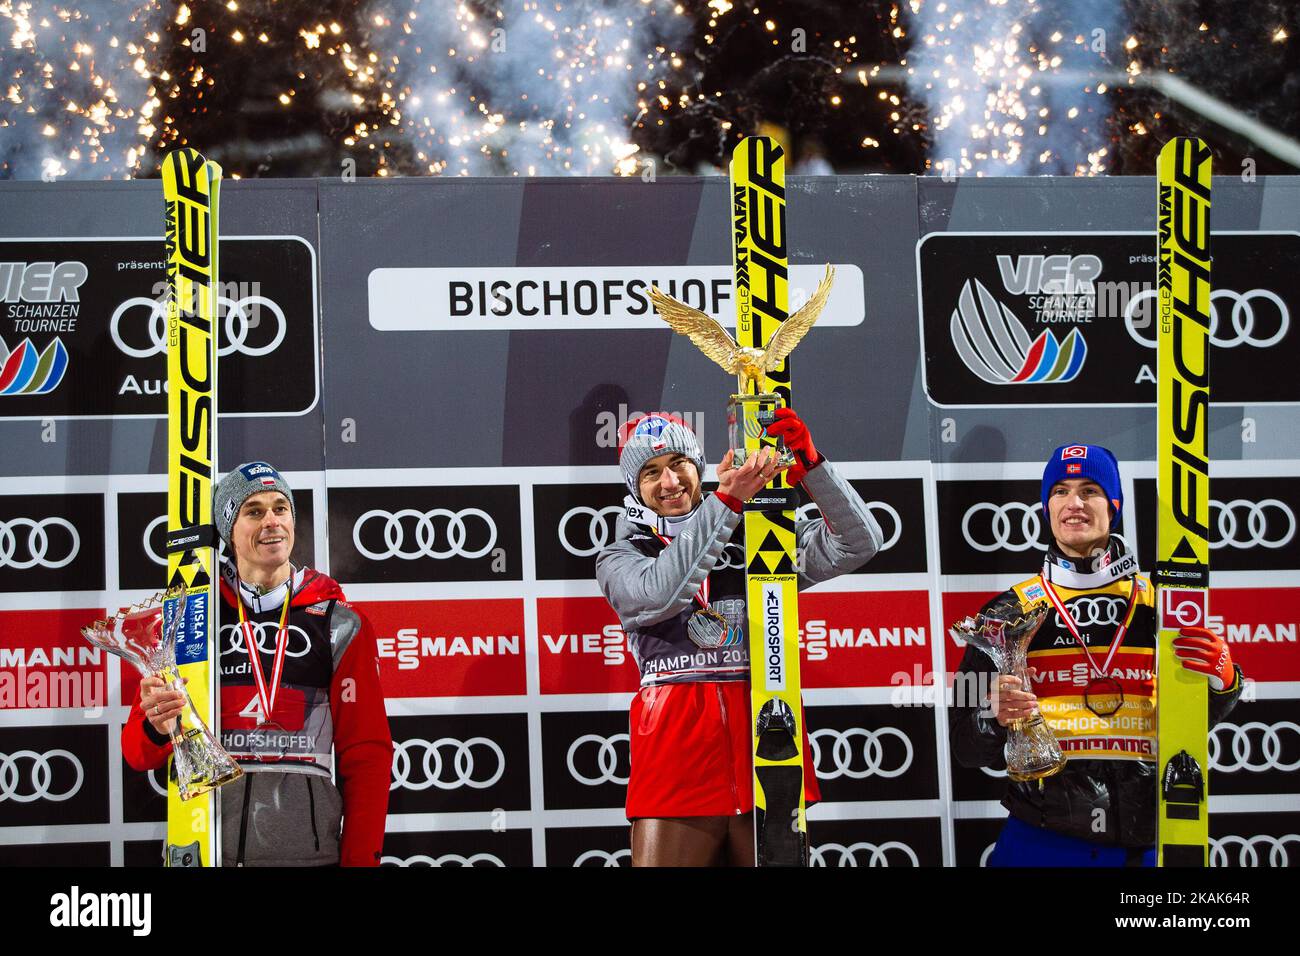 Kamil Stoch (C) of Poland celebrates winning the 65th Four Hills Tournament ski jumping event with Daniel Andre Tande (2nd Place, R) of Norway and Piotr Zyla (3rd Place, L) of Poland on Day 2 of the 65th Four Hills Tournament ski jumping event at Paul-Ausserleitner-Schanze on January 6, 2017 in Bischofshofen, Austria. (Photo by Damjan Zibert/NurPhoto) *** Please Use Credit from Credit Field *** Stock Photo